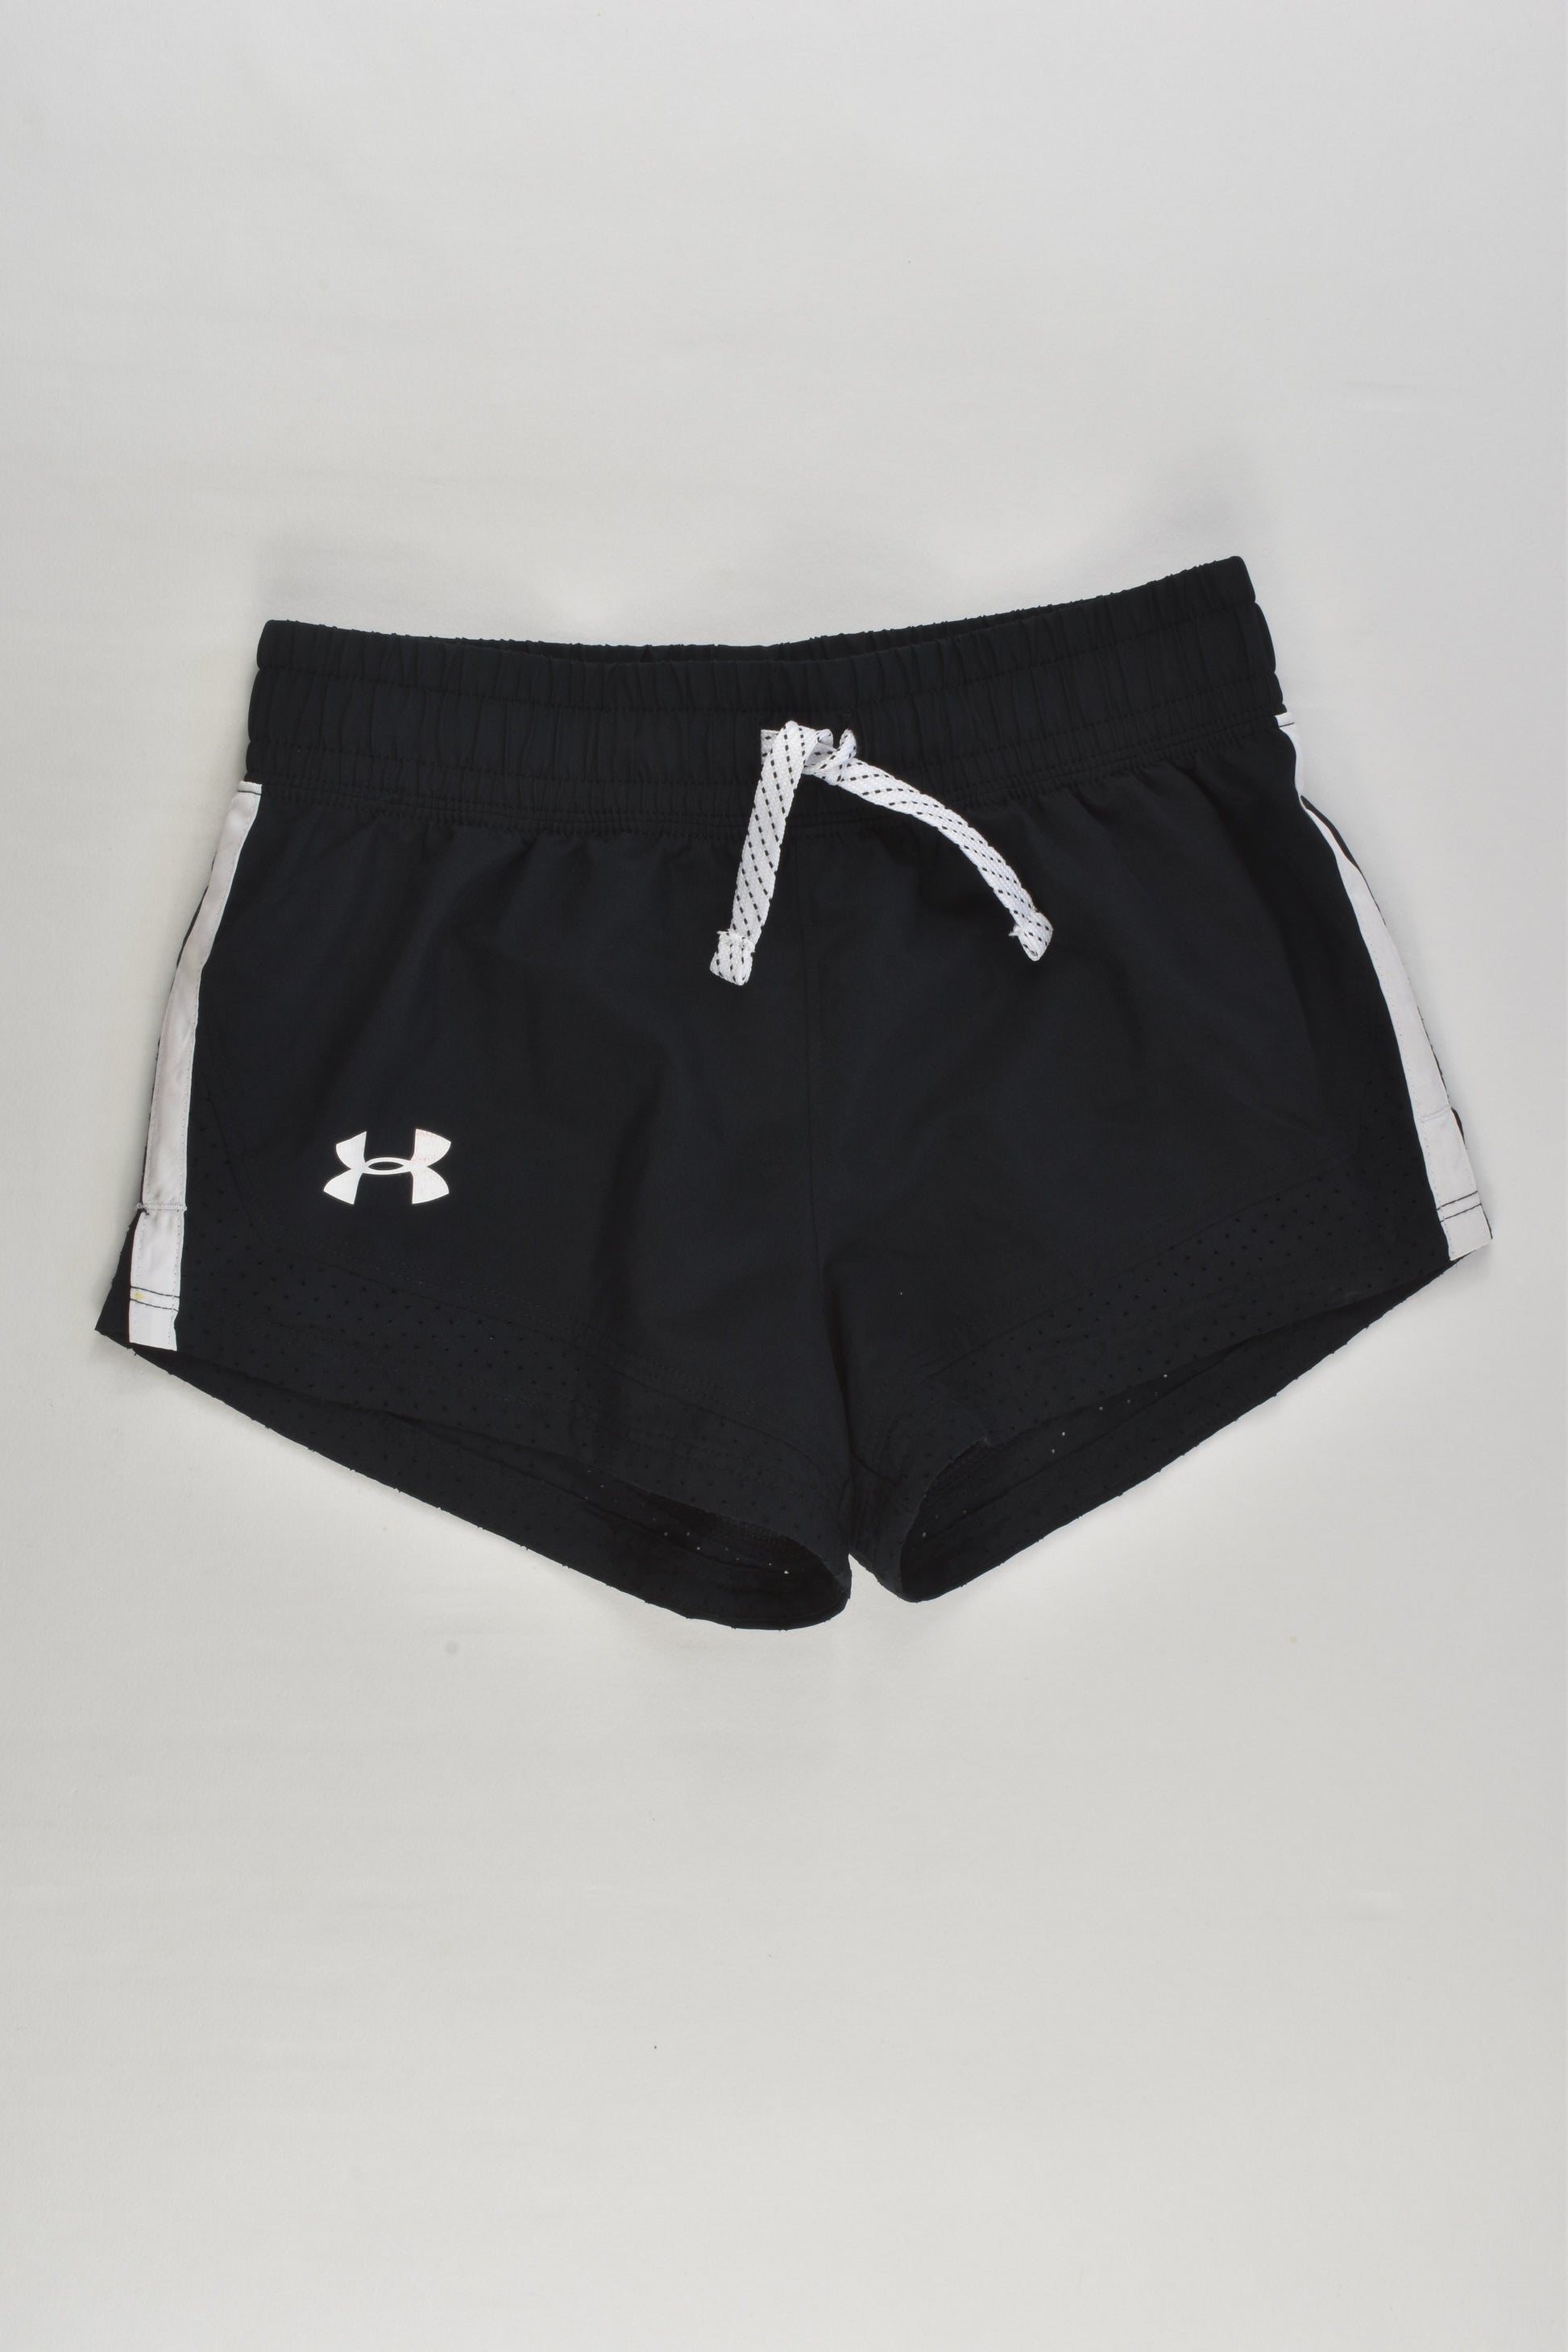 Under Armour Size 7-8 Active Shorts